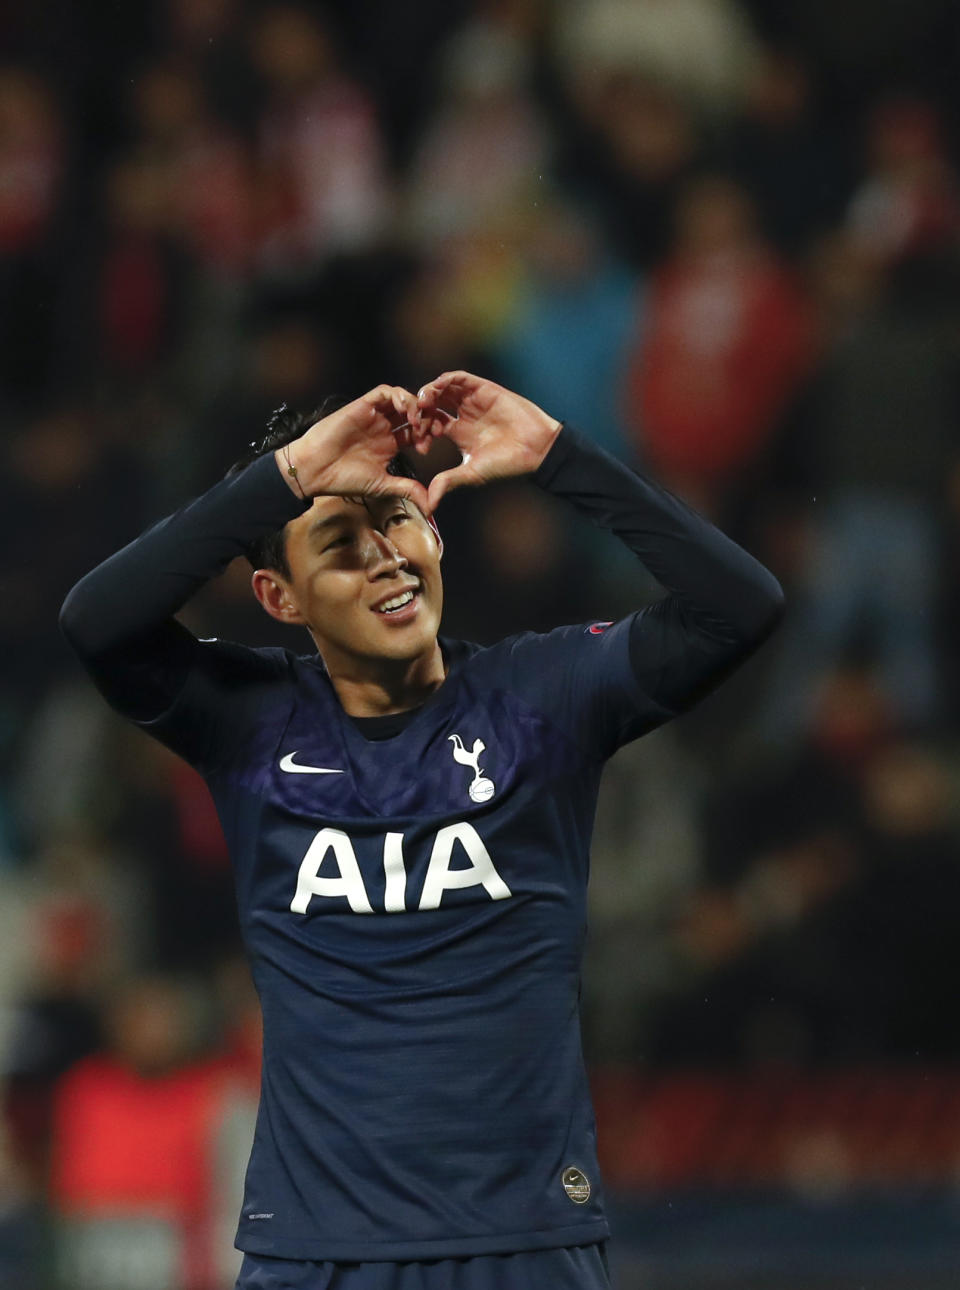 Tottenham's Son Heung-min, celebrates after scoring his side's third goal during the Champions League group B soccer match between Red Star and Tottenham, at the Rajko Mitic Stadium in Belgrade, Serbia, Wednesday, Nov. 6, 2019. (AP Photo/Darko Vojinovic)